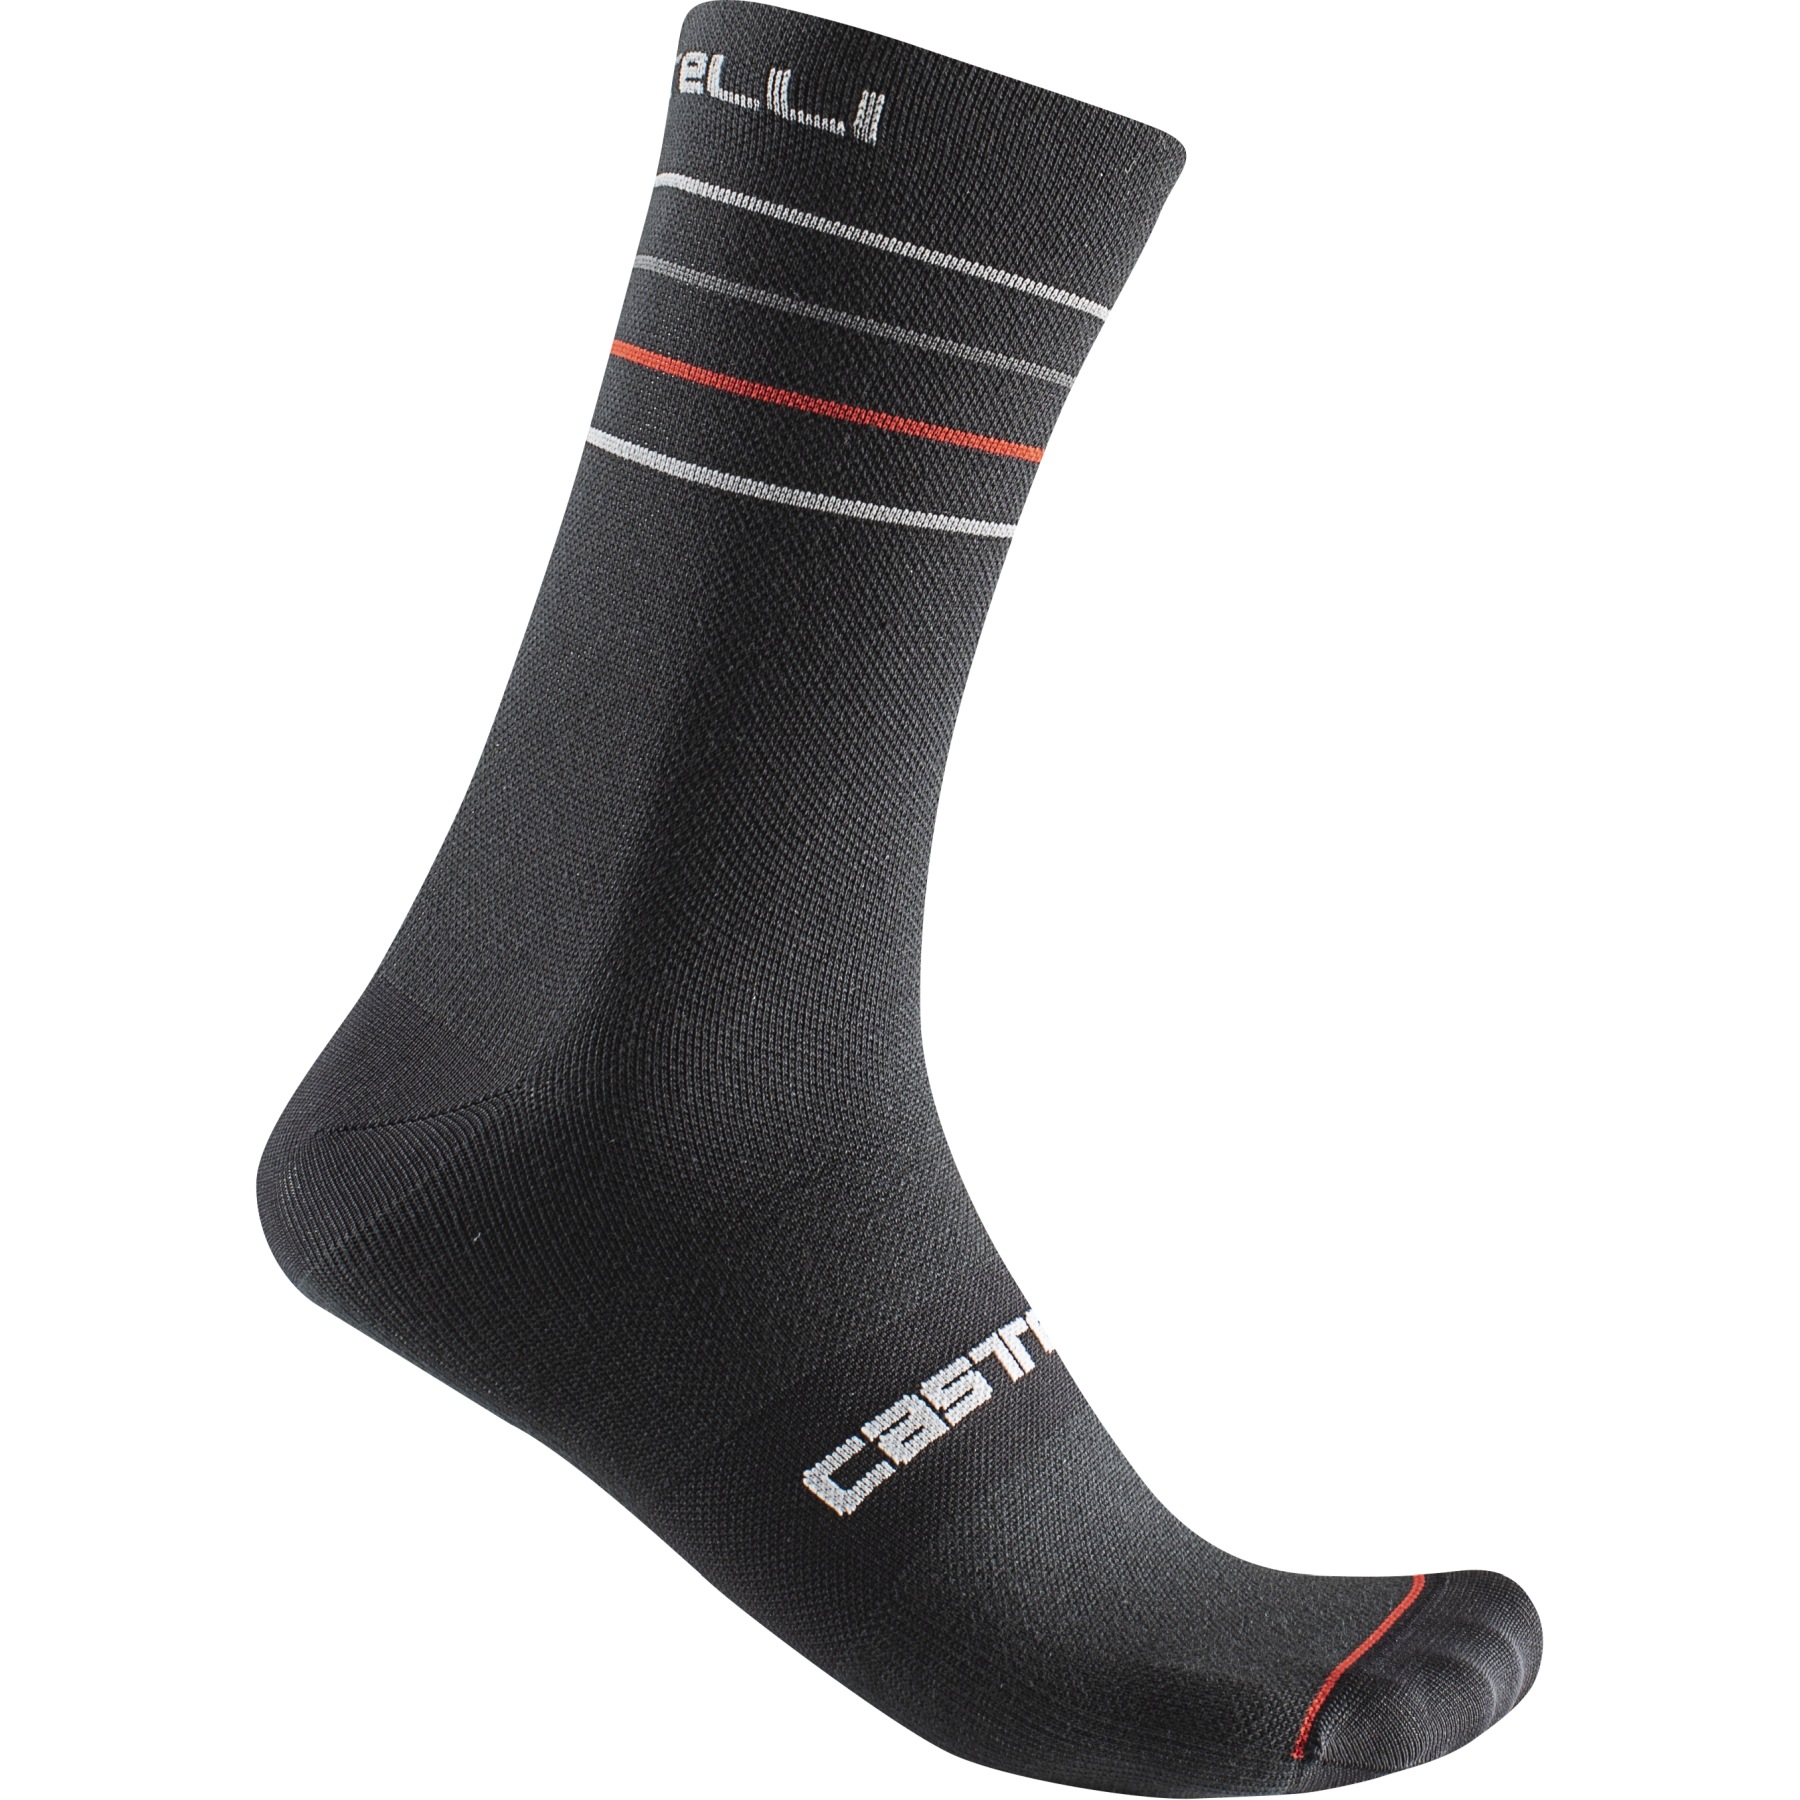 Picture of Castelli Endurance 15 Socks - black/silver grey-red 010